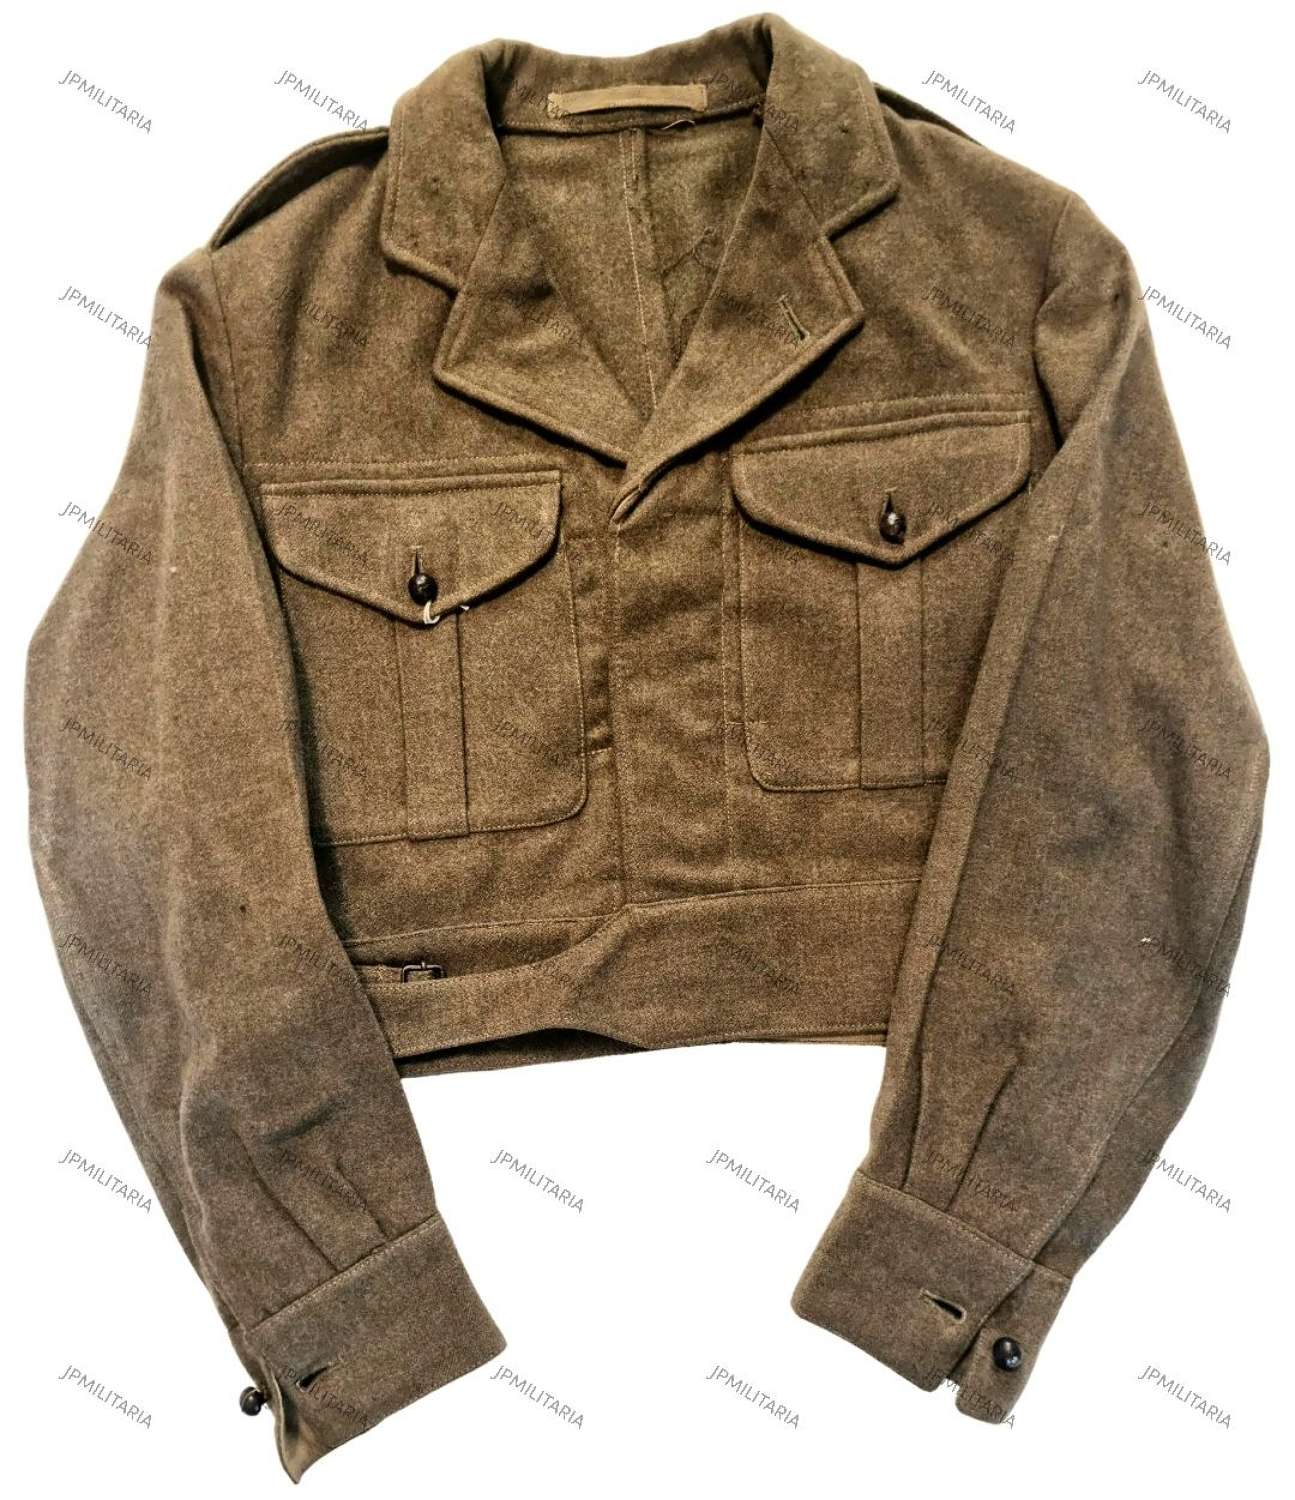 British Army officers 1949 Pattern